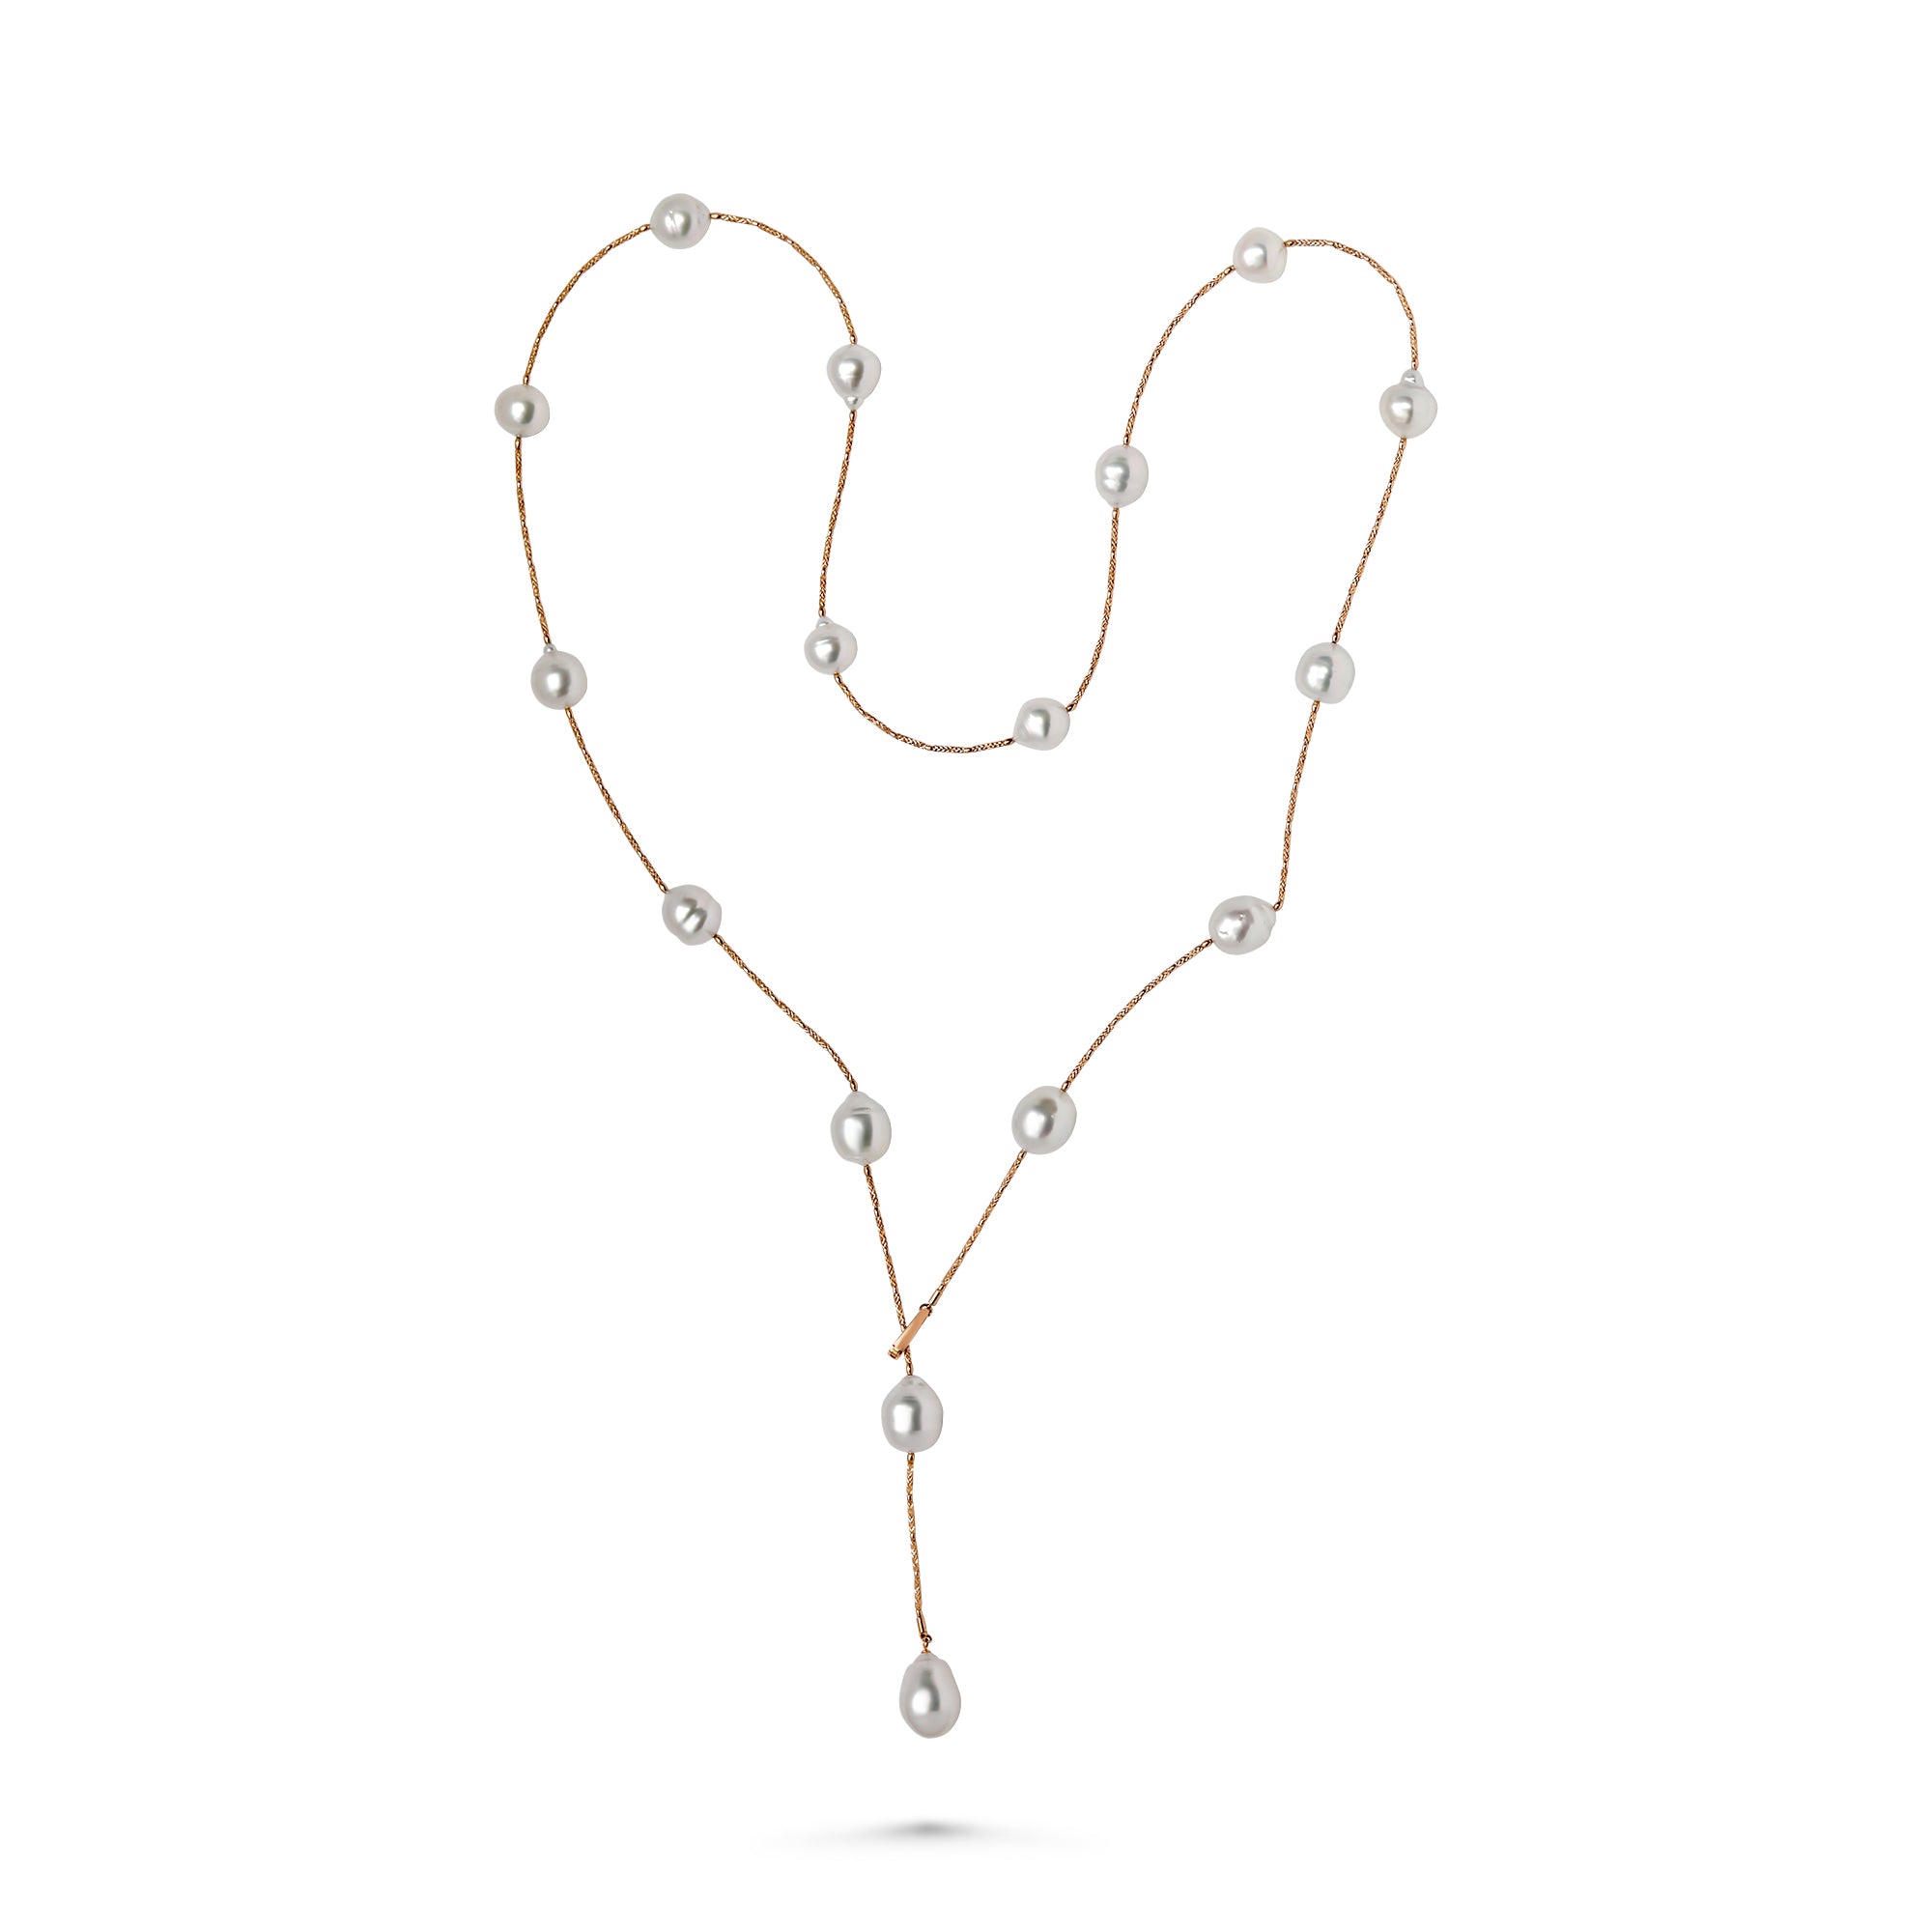 17 South seas pearls  18k rose gold coil  12.50 mm   32" long  You can wear in many ways & styles   adjustable clasp